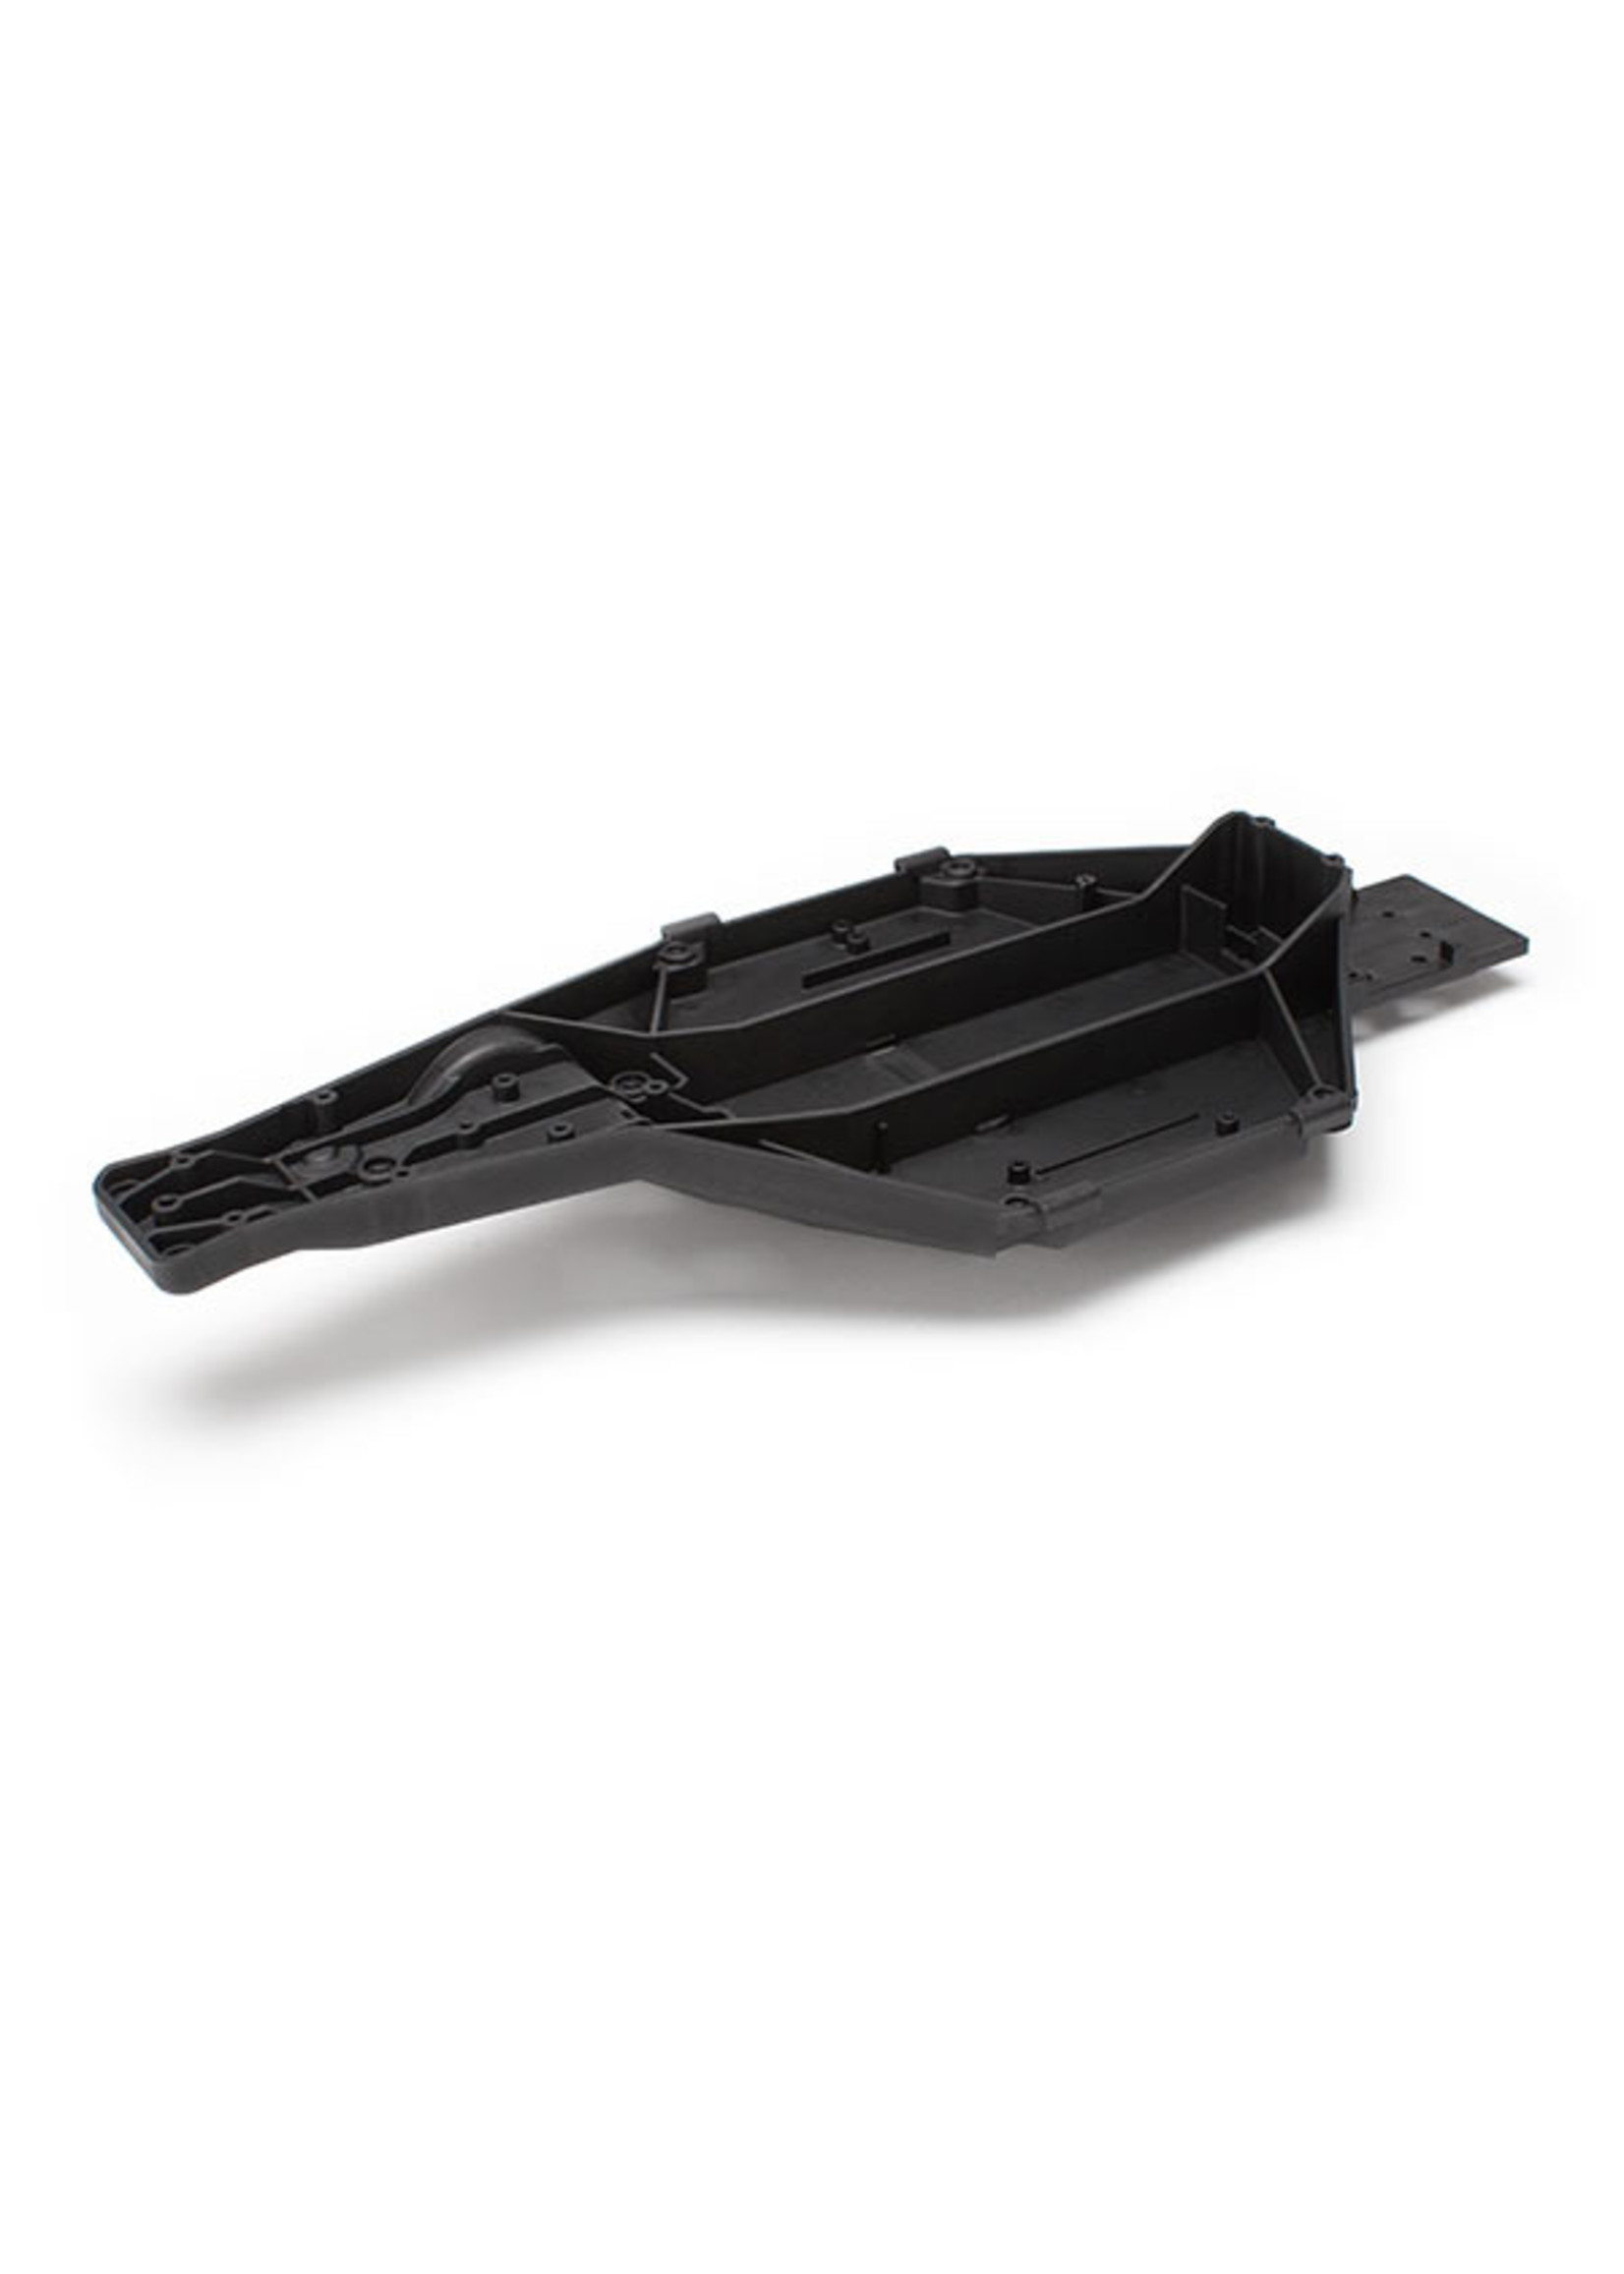 Traxxas 5832 - Low CG Chassis 2WD - Black